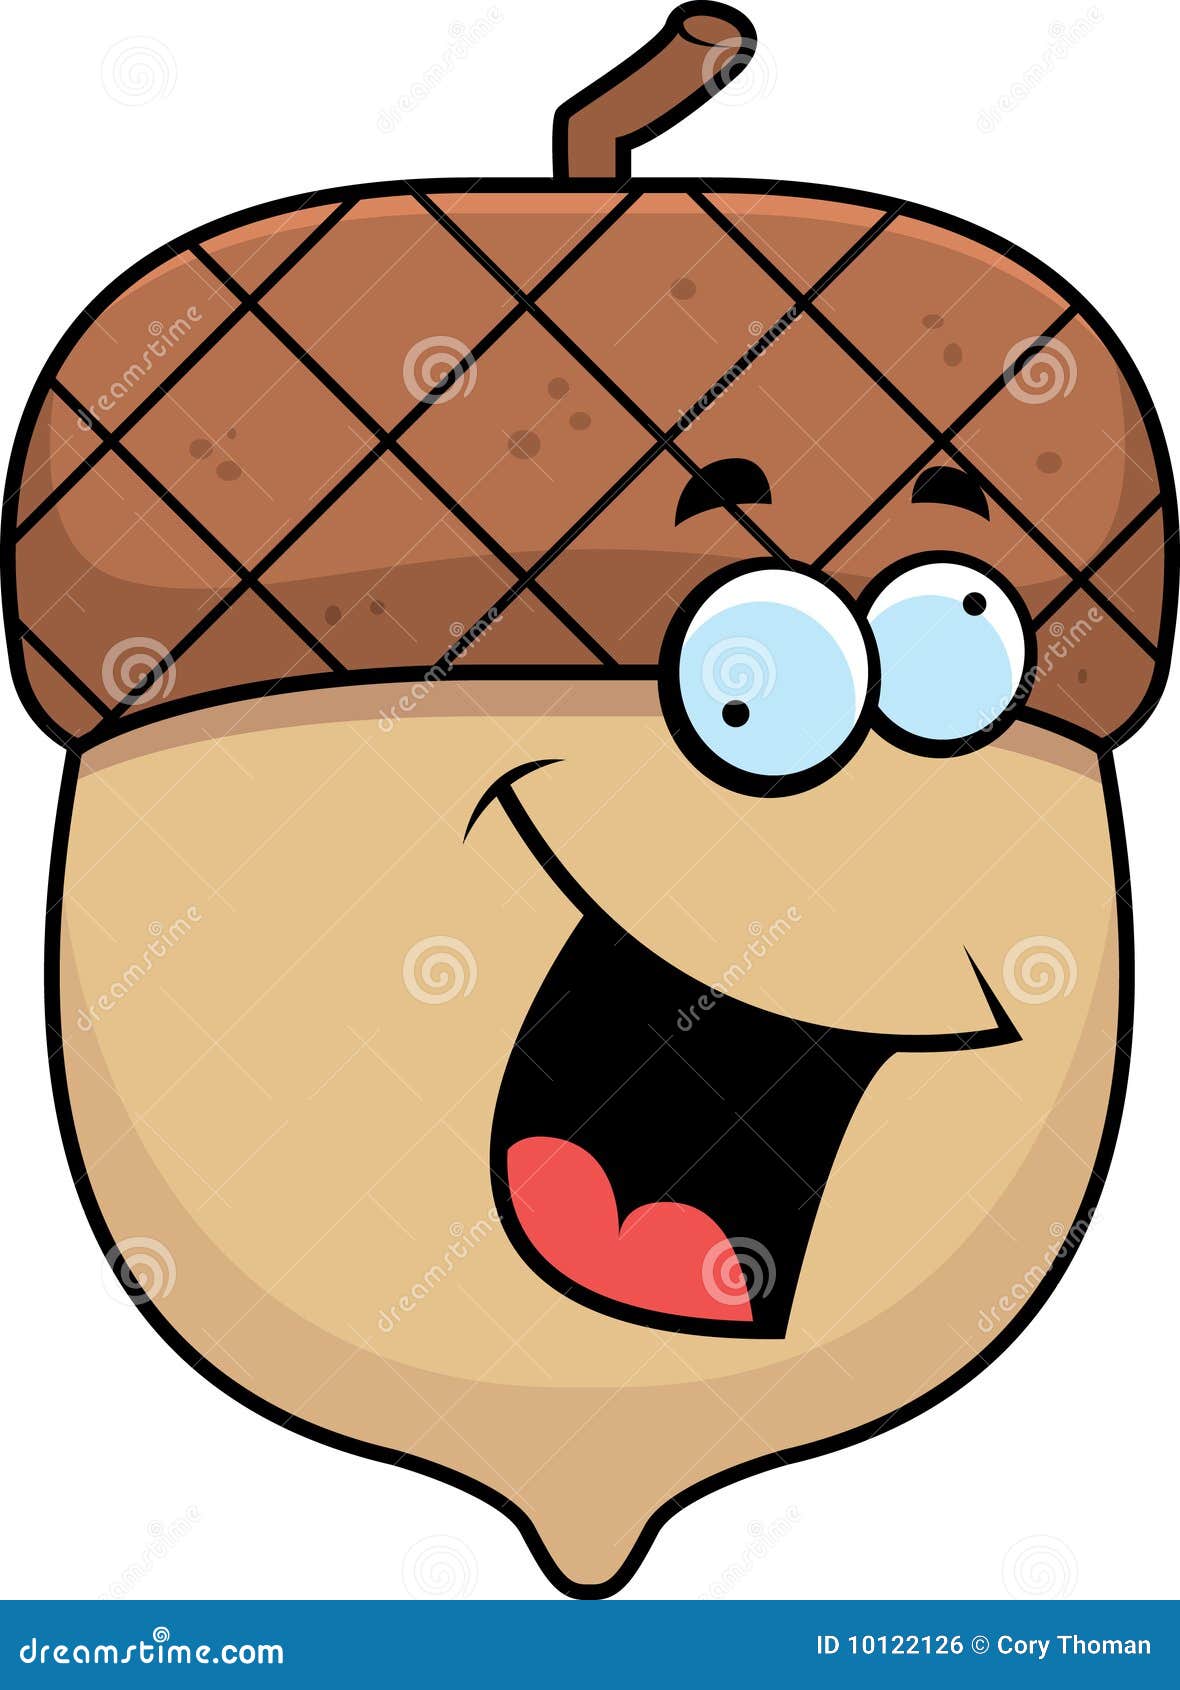 clipart pictures of nuts - photo #46